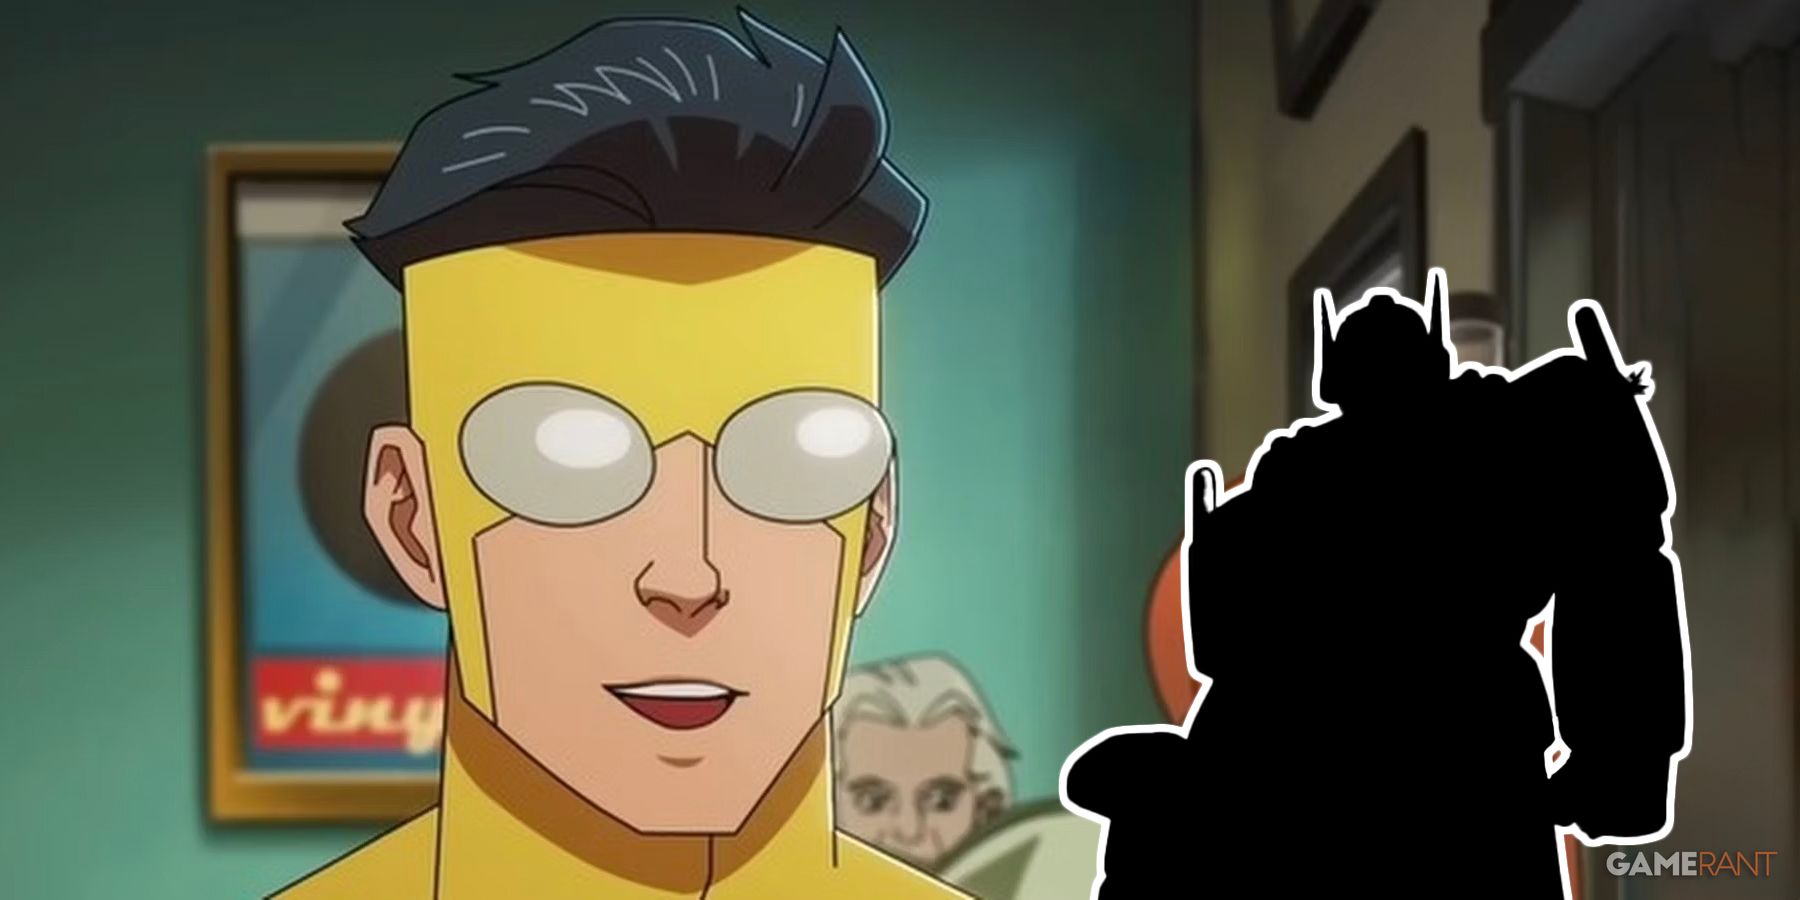 Invincible season 2 part 2 release, cast, and all the news we've heard -  Polygon